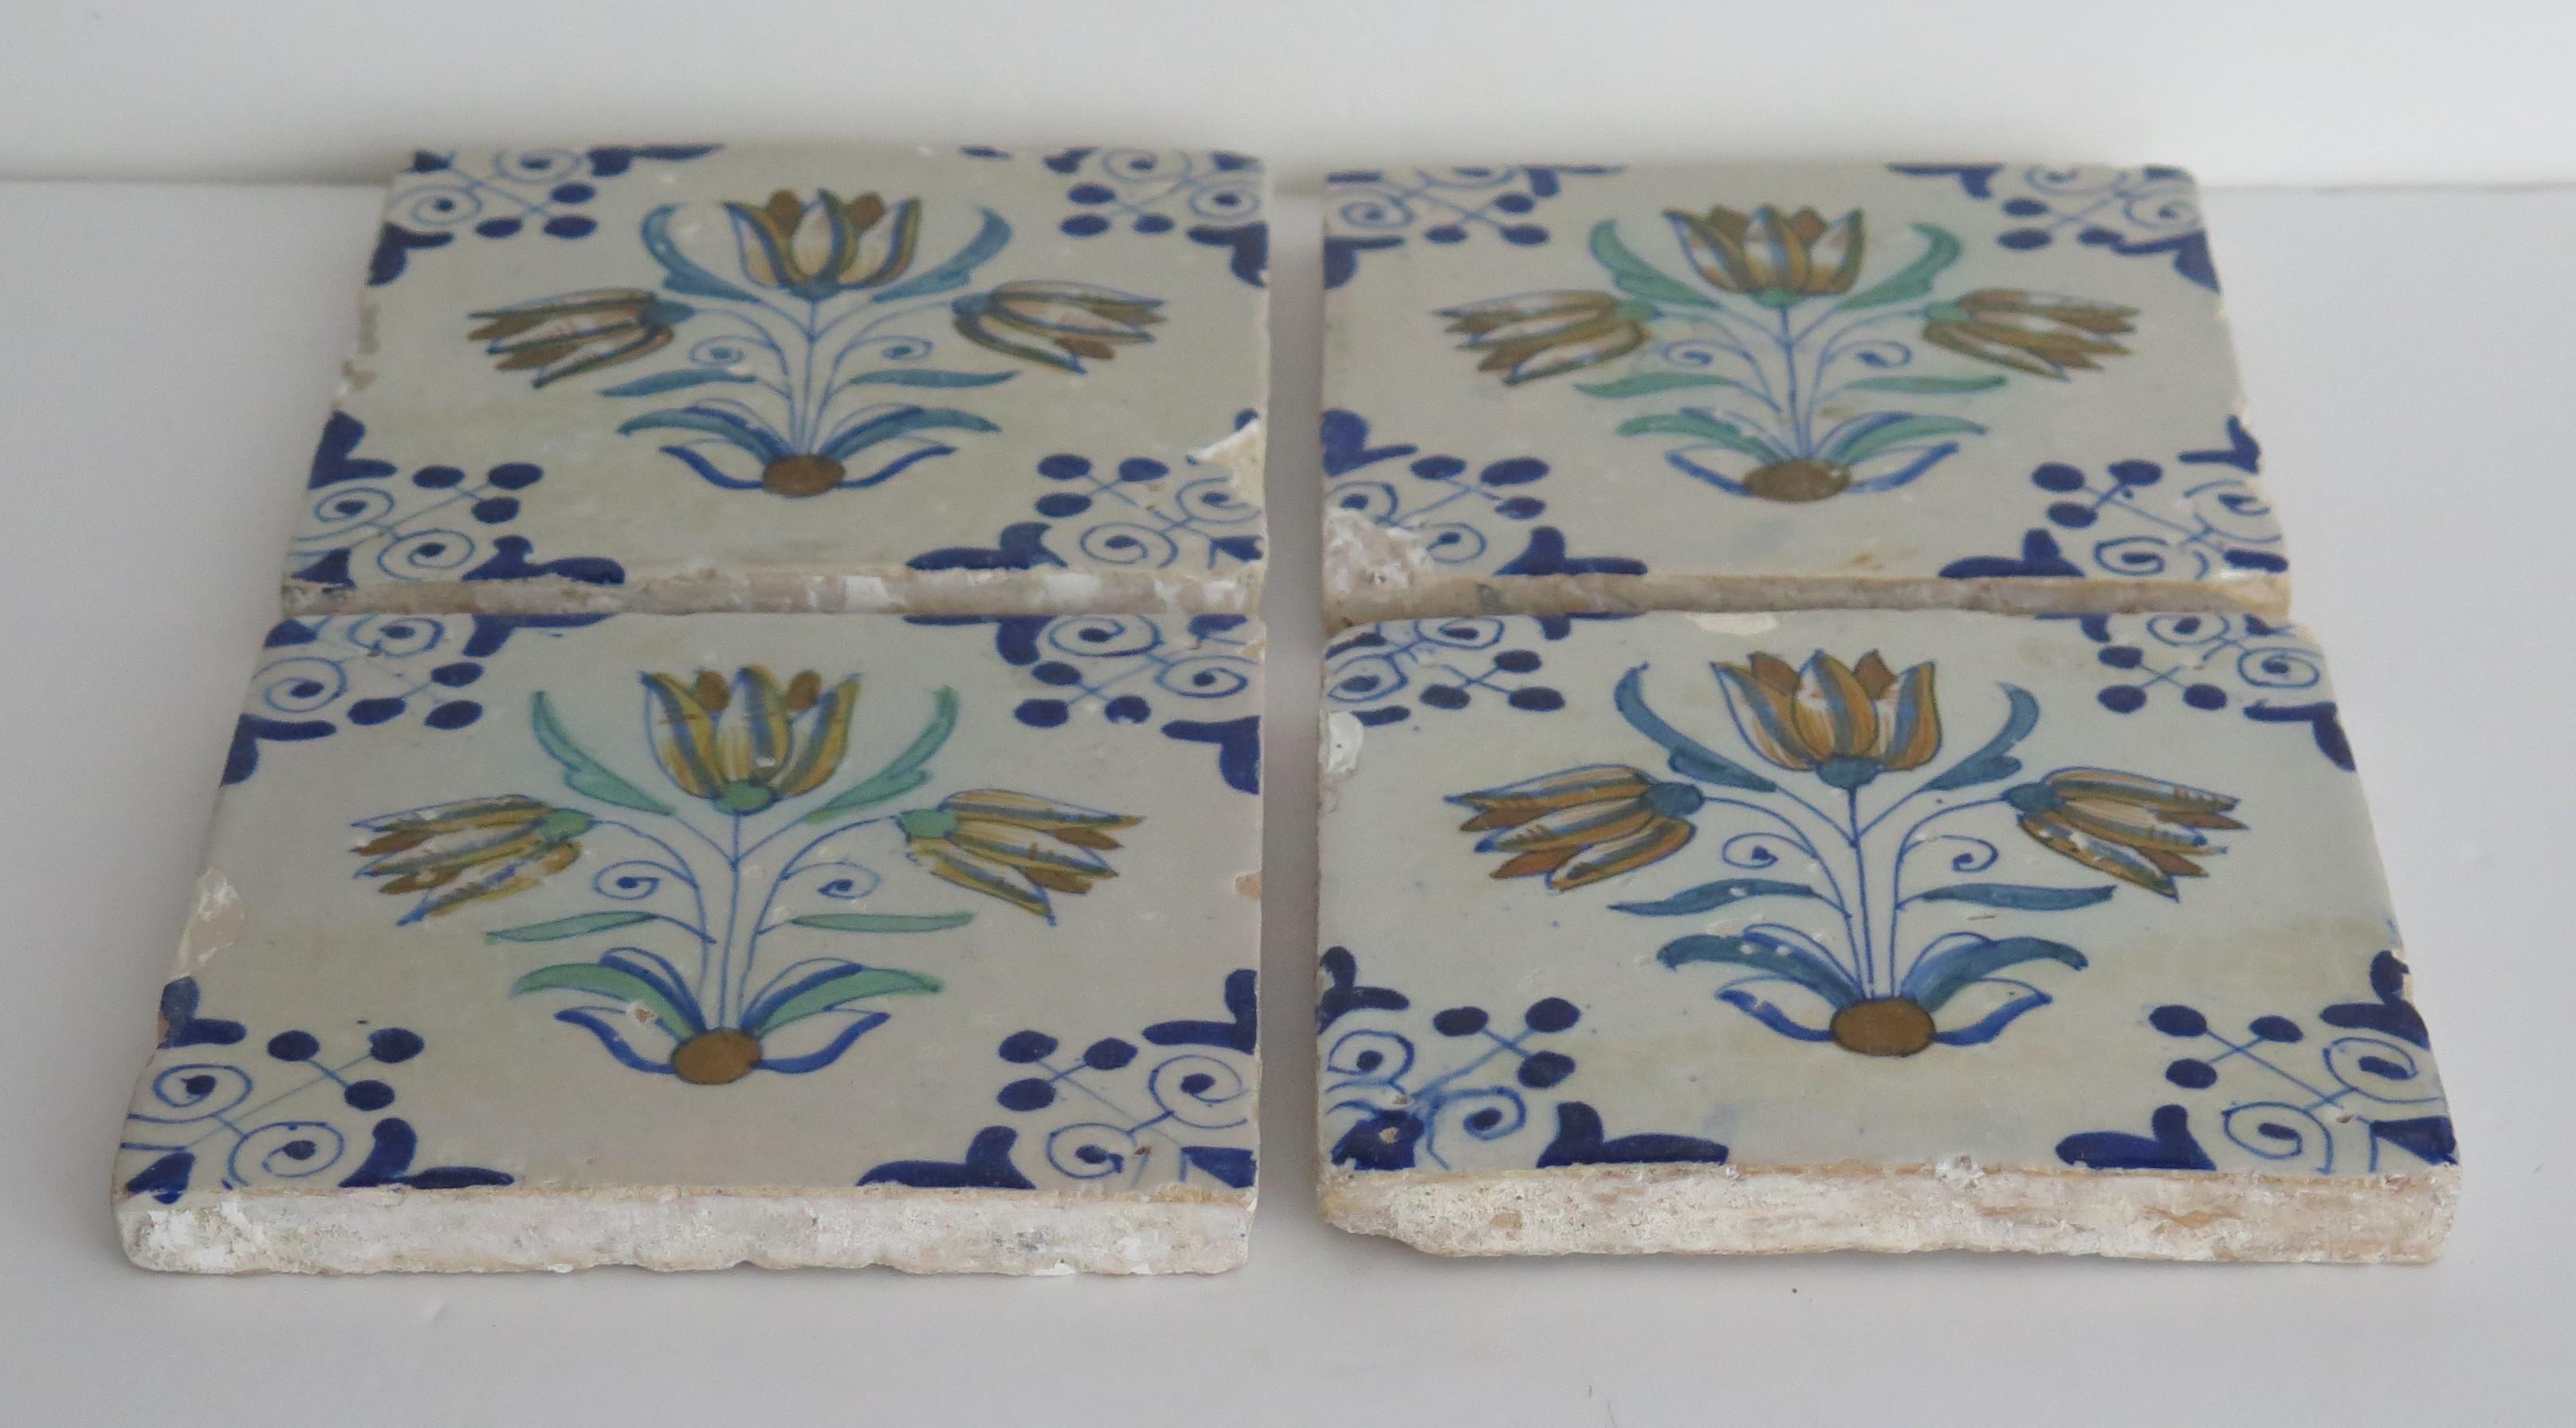 These are a set of four very attractive similar, Dutch (Netherlands), delft Polychrome, blue and white hand painted earthenware ceramic wall tiles dating to the early 17th century.

All tiles are nominally 5 inches square and 1/2 inches thick.